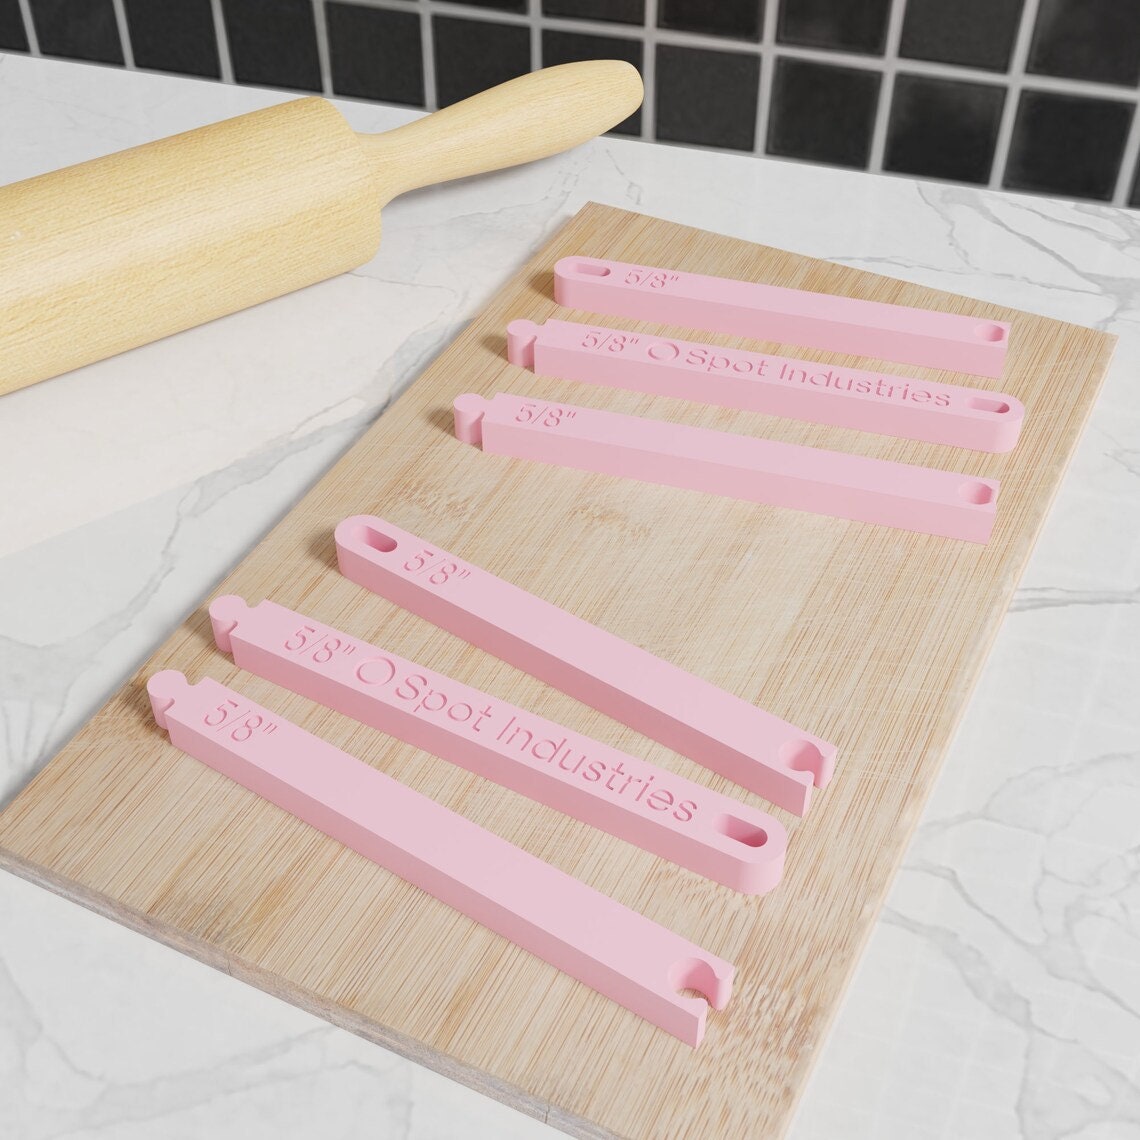 Extra Long Dough Sticks (Metric) in 19mm Thickness. Get The Perfect Dough Height Every Time With Our Extra Long Dough Sticks